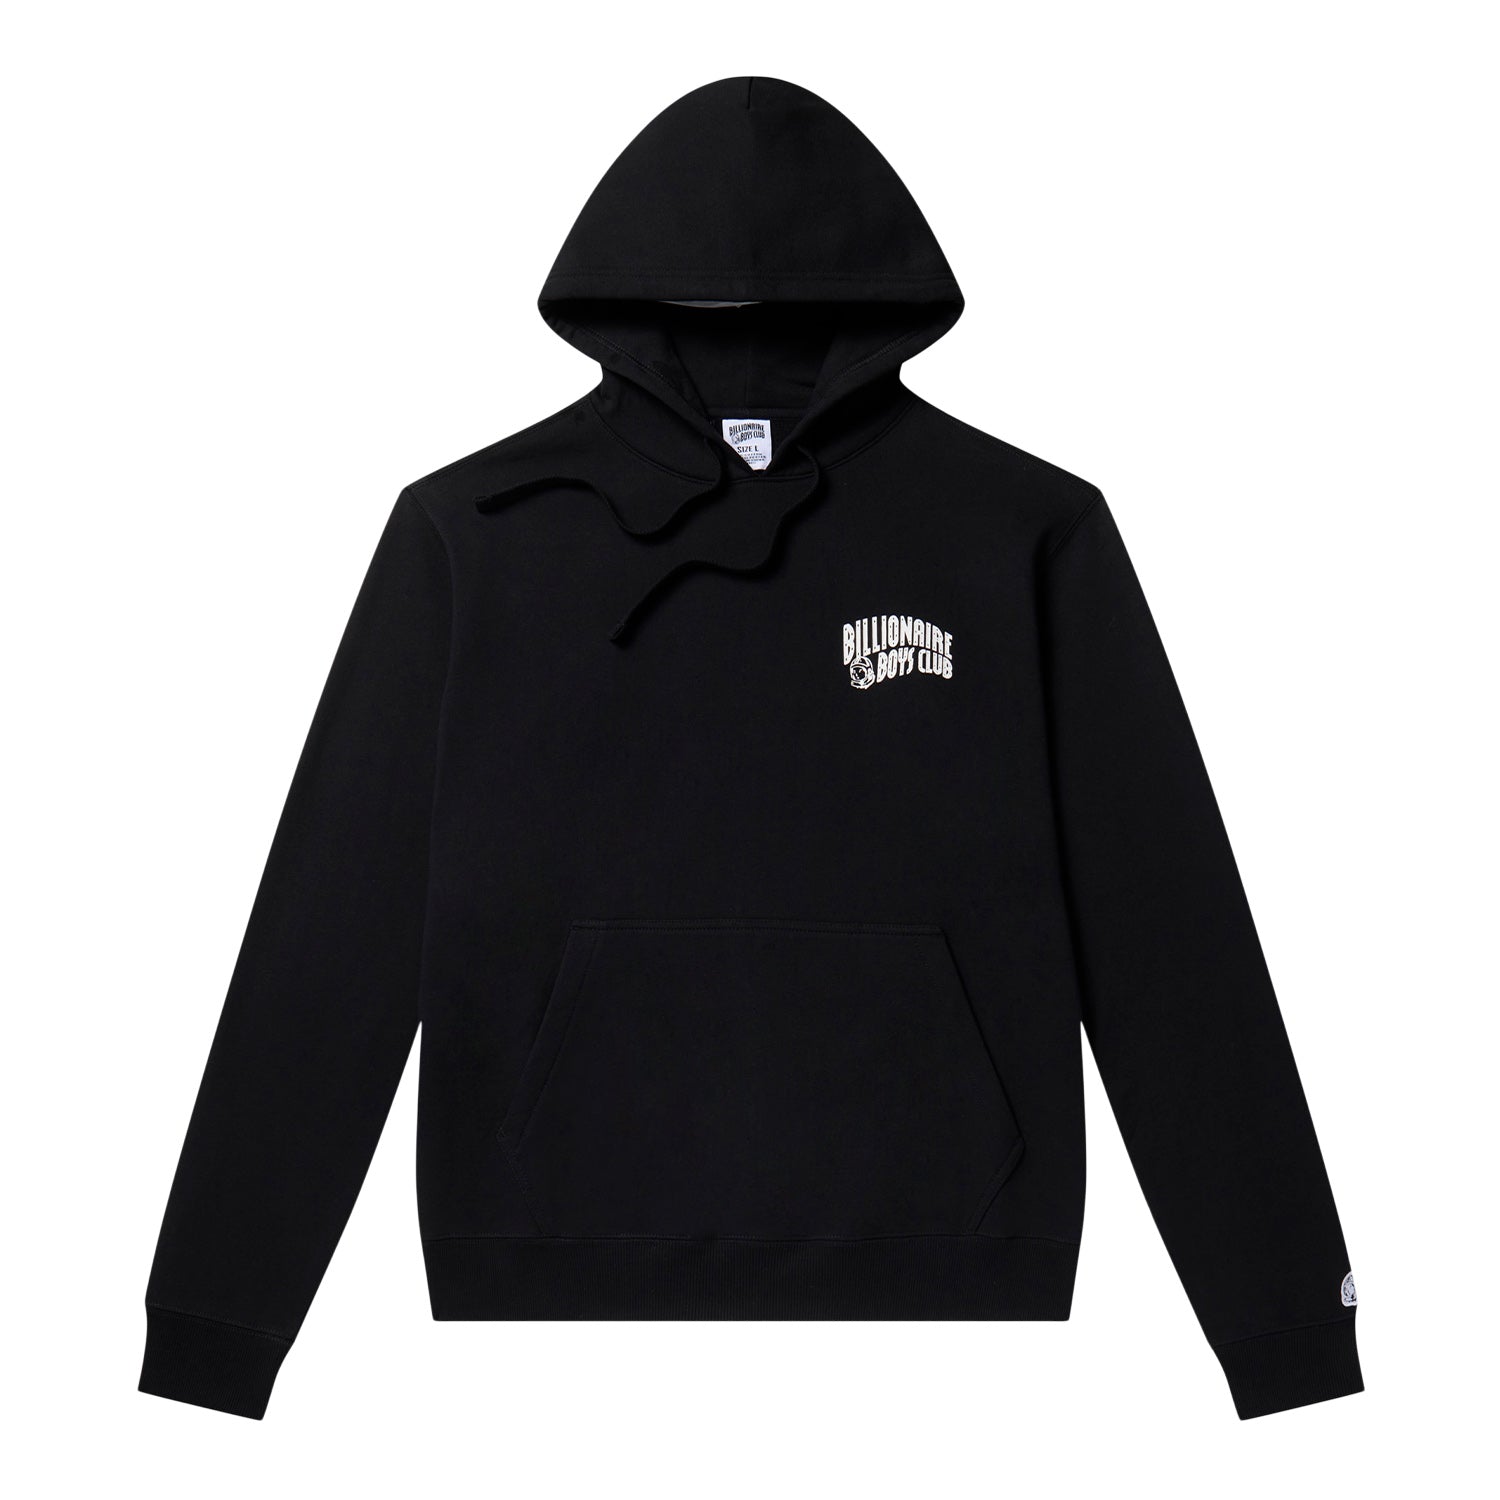 unravel project black zip-front bomber jacket BB Jewels Hoodie Black 841-3304-BLK - SWEATERS - Canada